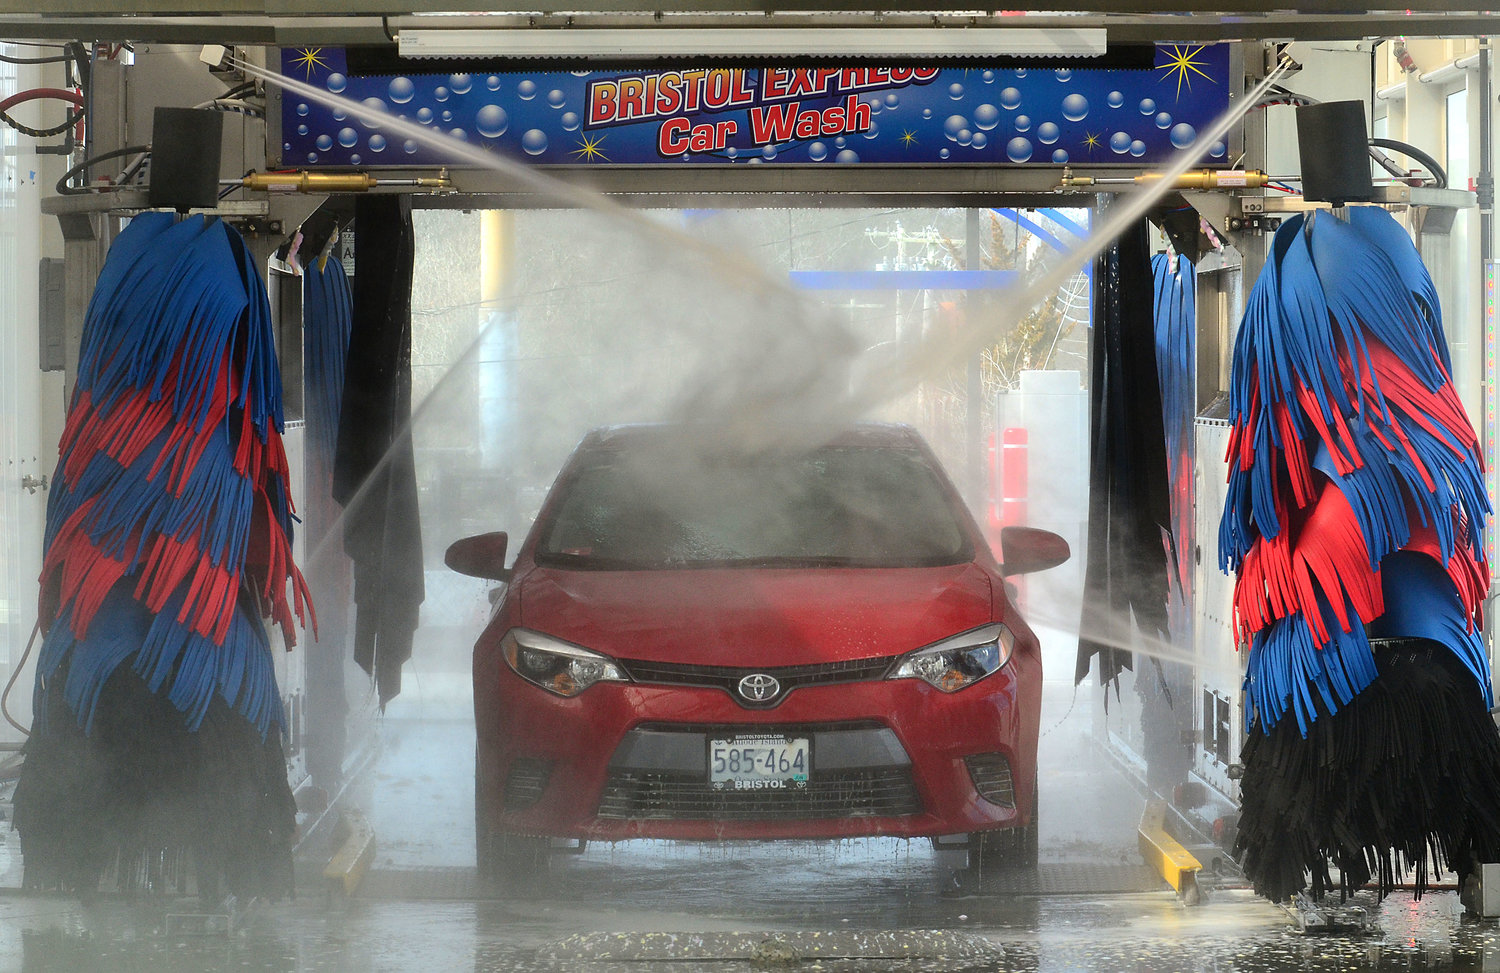 A customer and her passenger ride along while in the Bristol Express car wash on Metacom Avenue on Thursday.